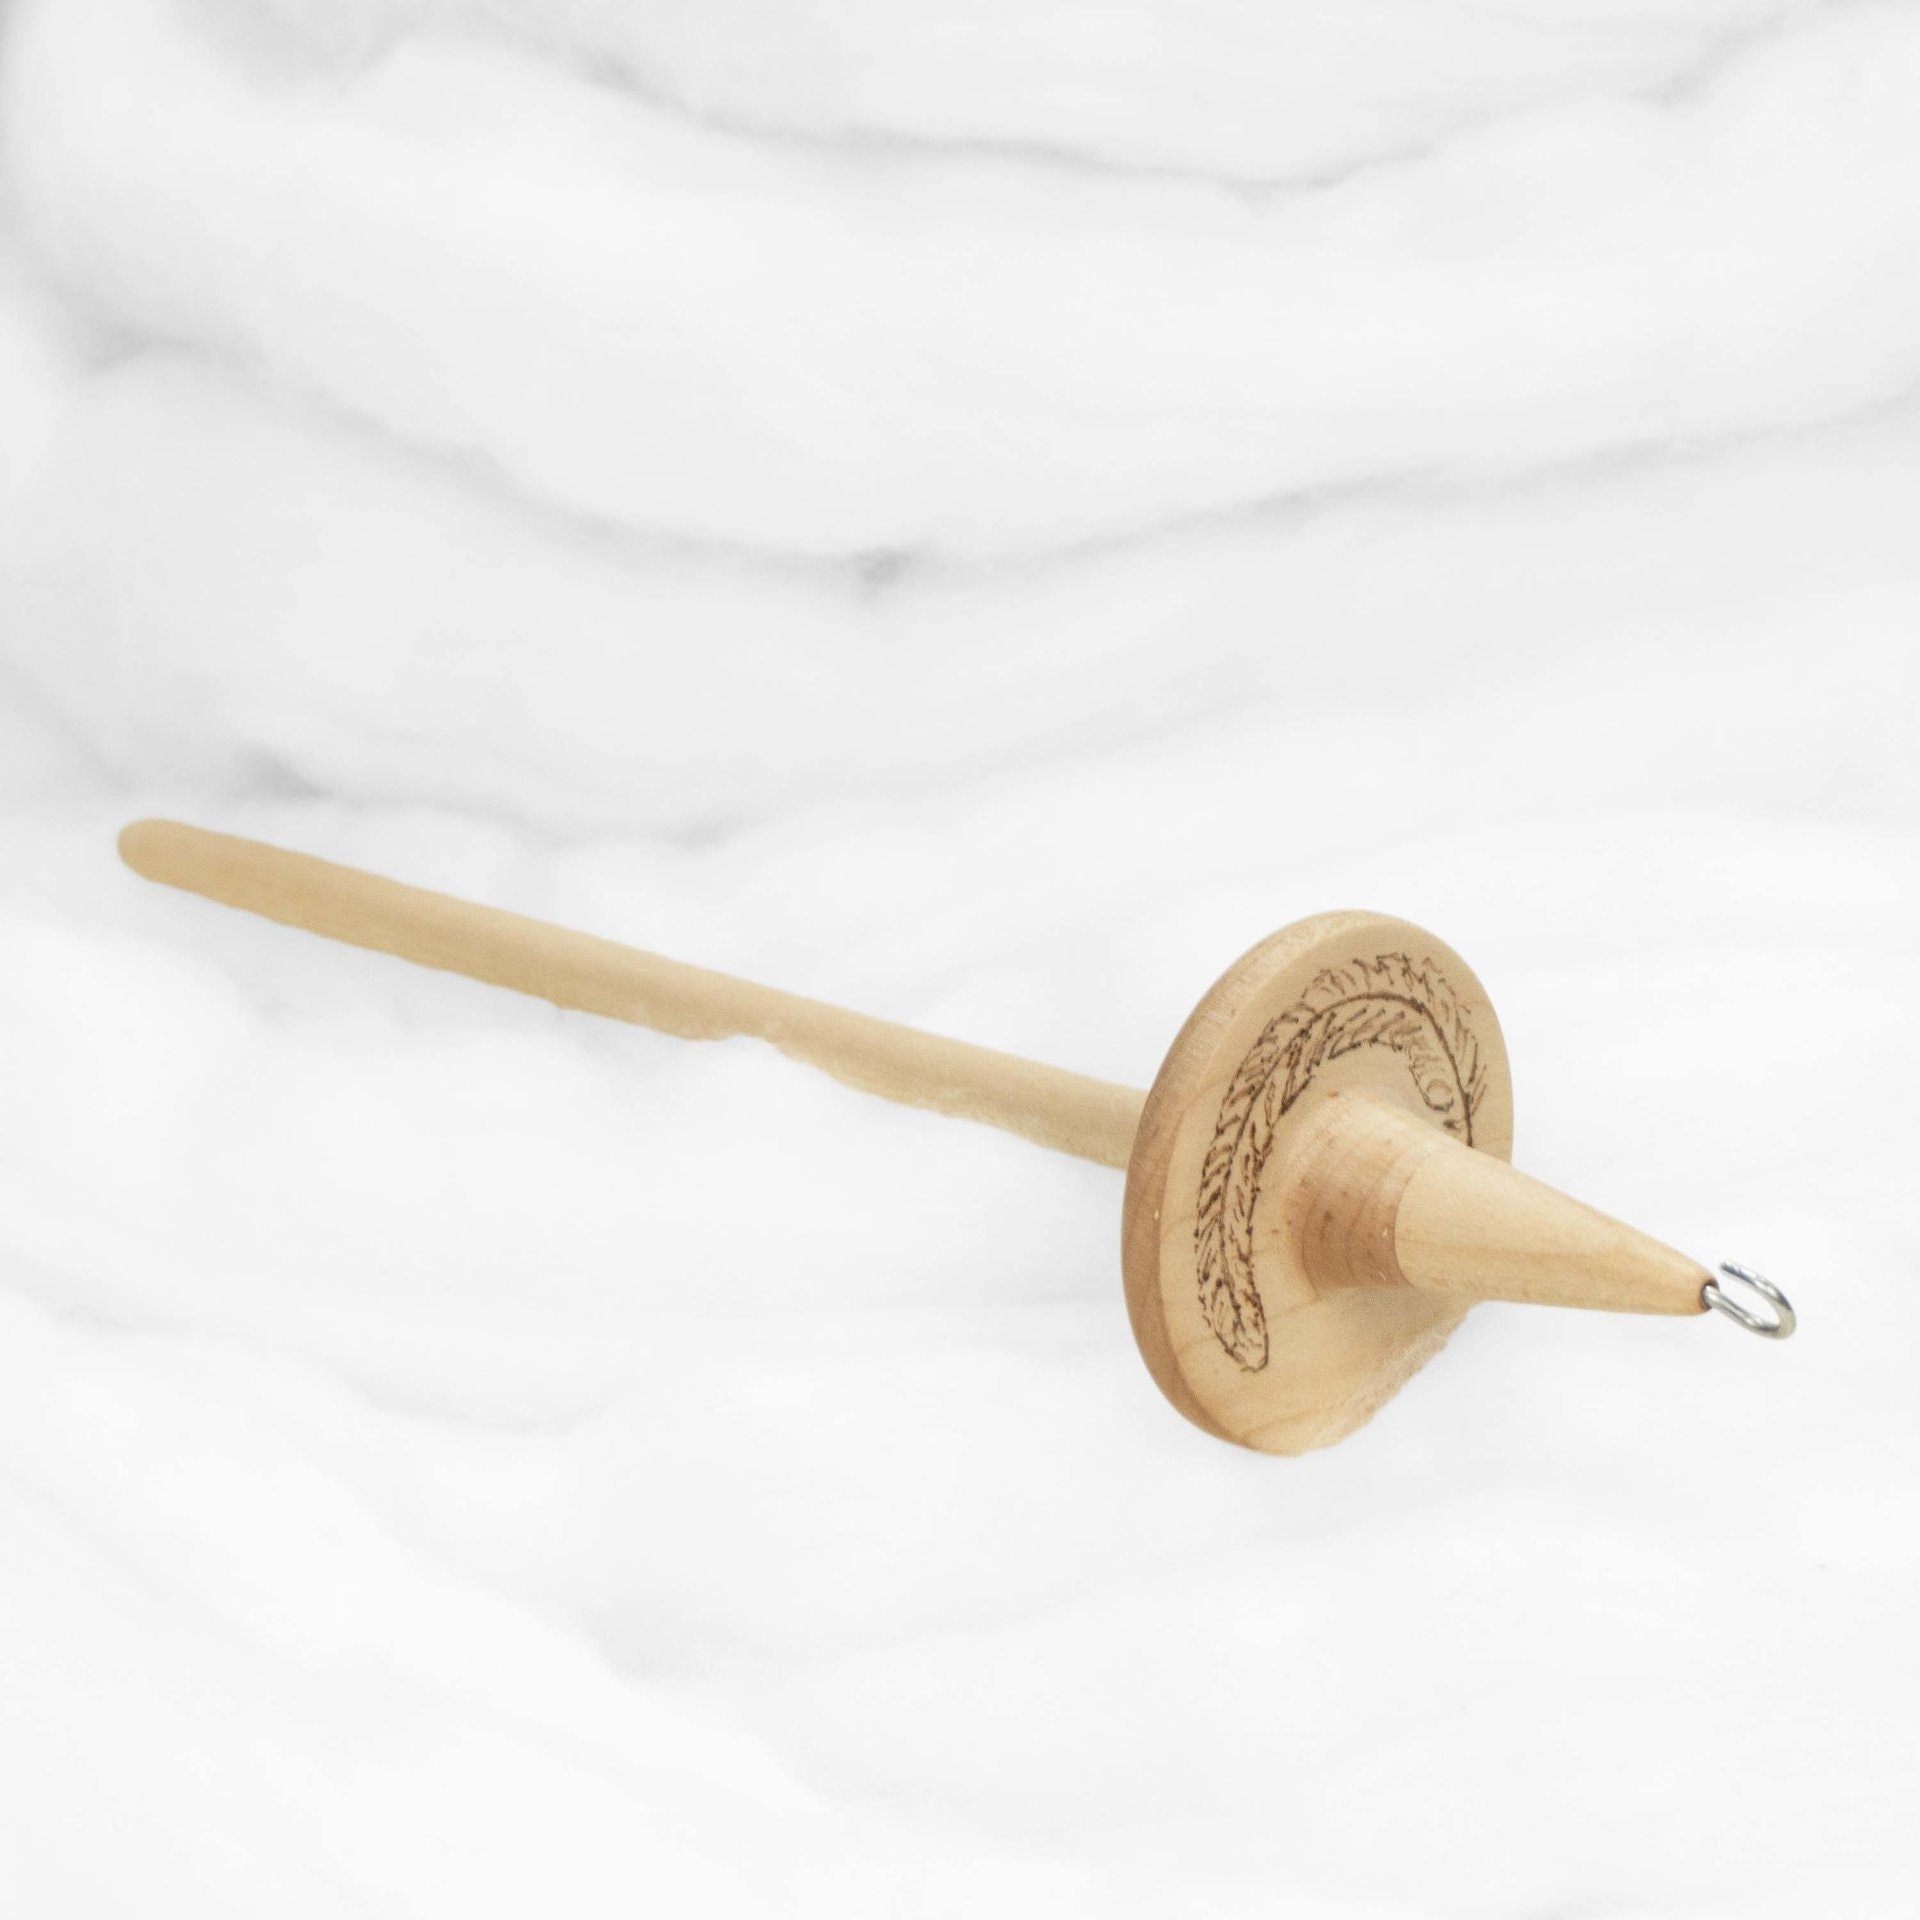 Feather - Llina Hand-Turned Maple Wood Pyrograph Drop Spindle Lightweight Top Whorl 14 Grams